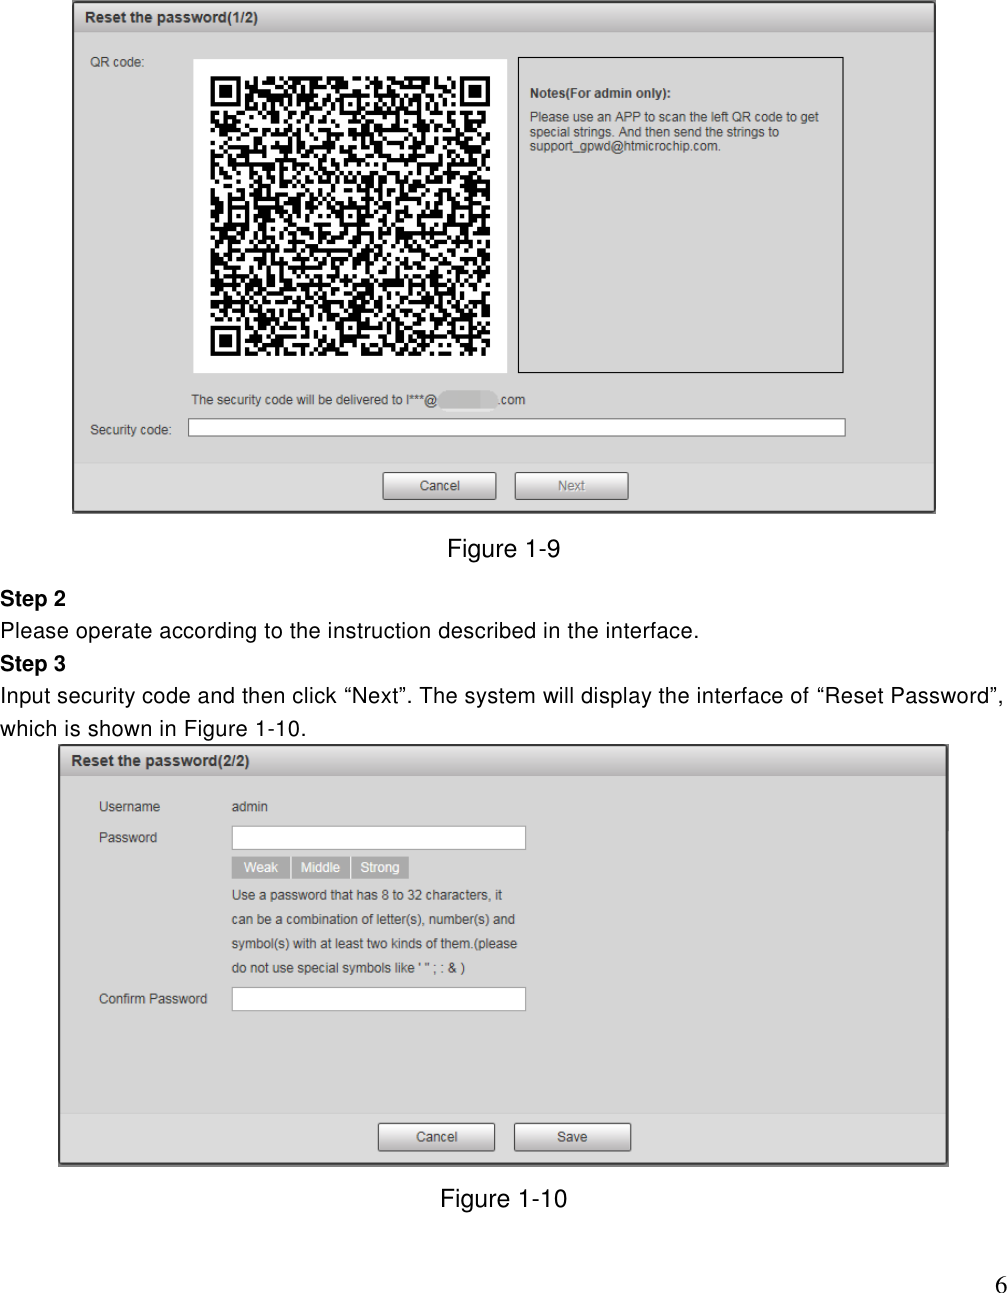                                                                              6  Figure 1-9 Step 2 Please operate according to the instruction described in the interface. Step 3 Input security code and then click “Next”. The system will display the interface of “Reset Password”, which is shown in Figure 1-10.  Figure 1-10  